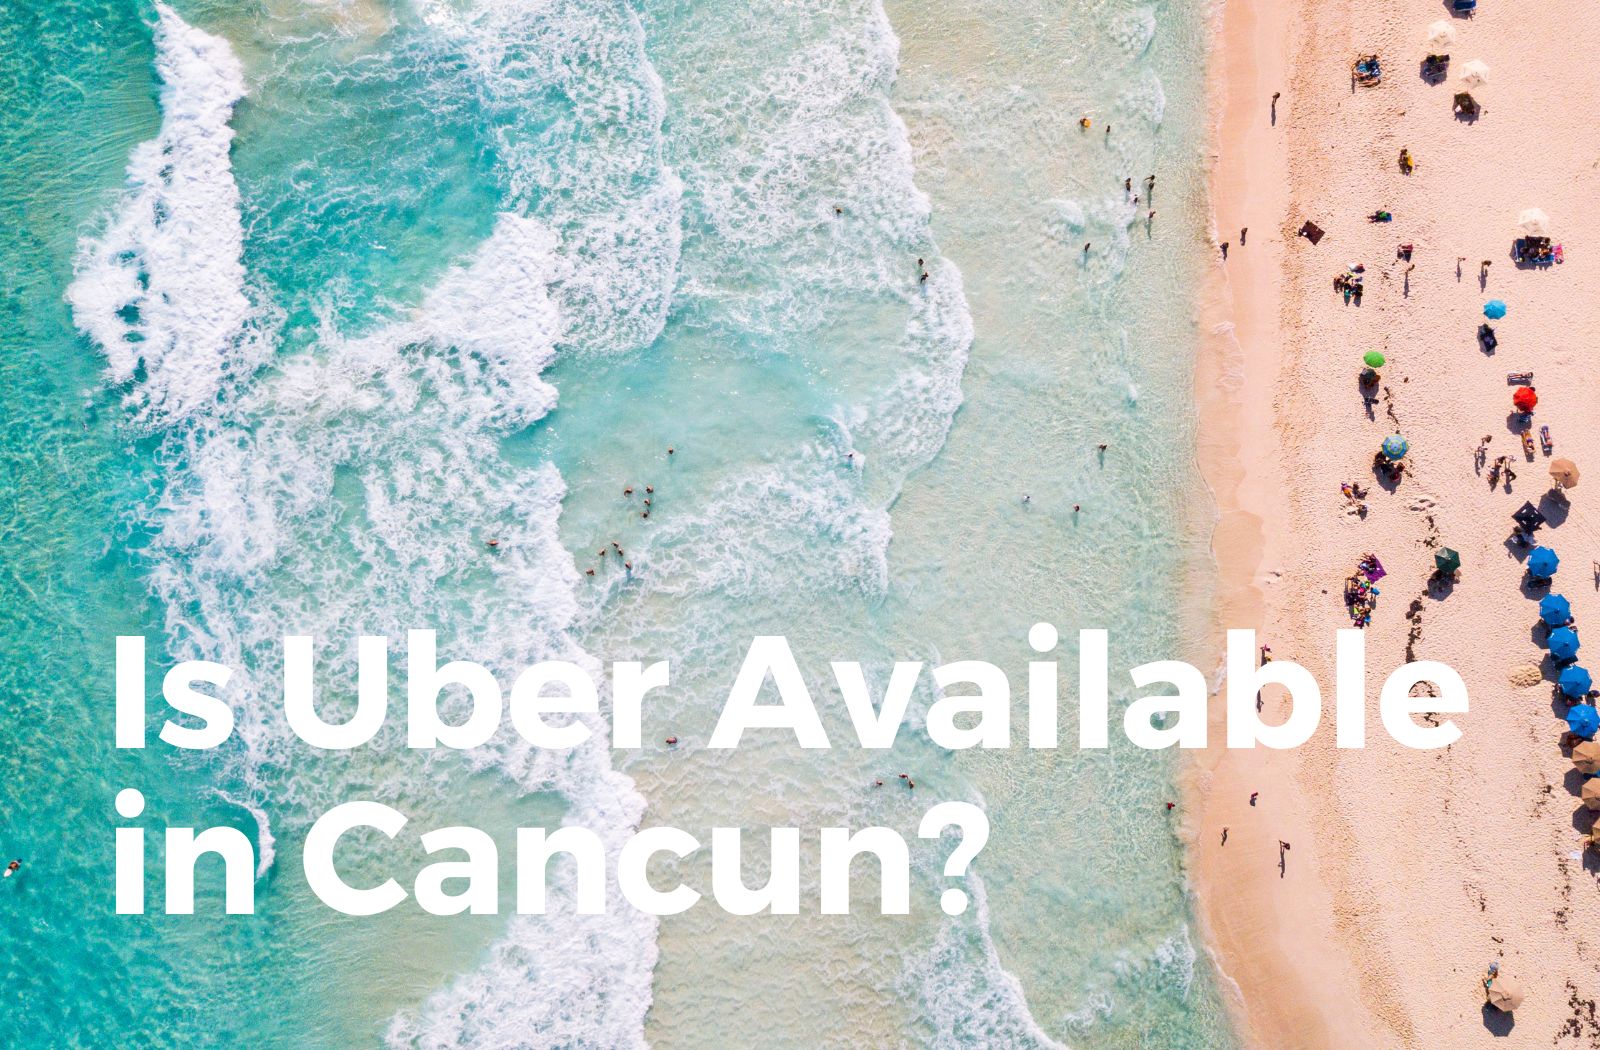 Is Uber Available in Cancun